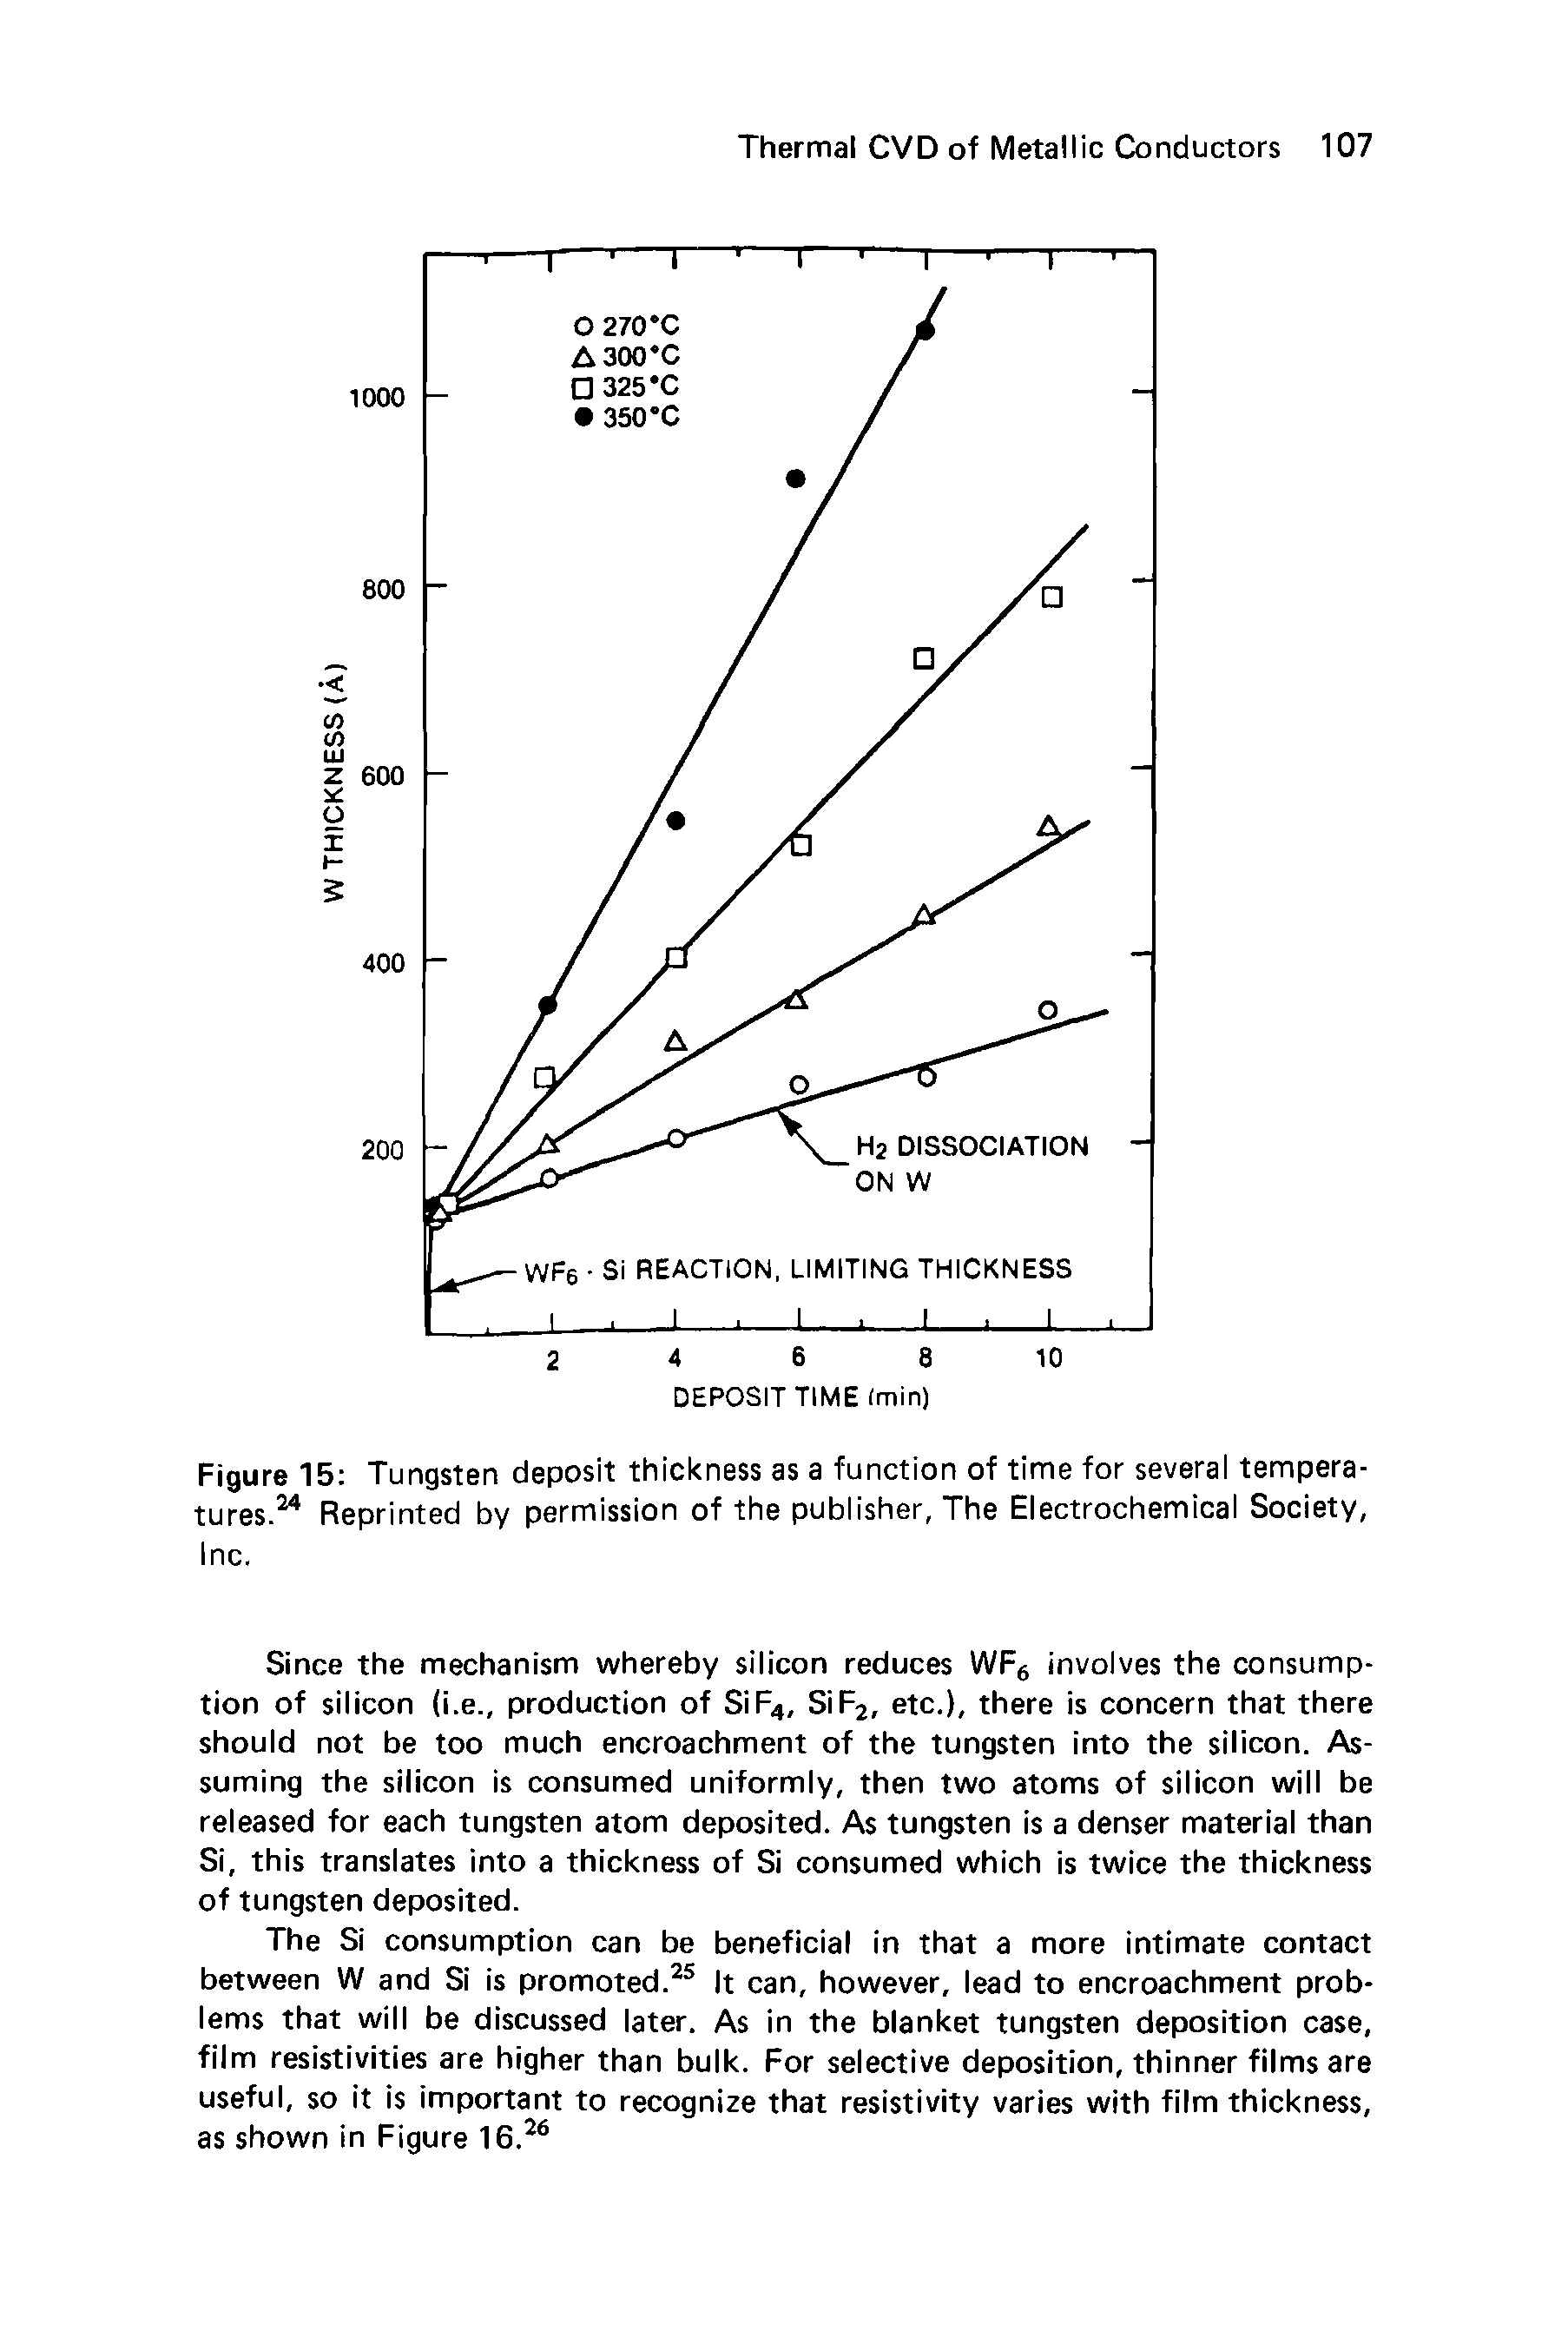 Figure 15 Tungsten deposit thickness as a function of time for several temperatures.24 Reprinted by permission of the publisher, The Electrochemical Society, Inc.